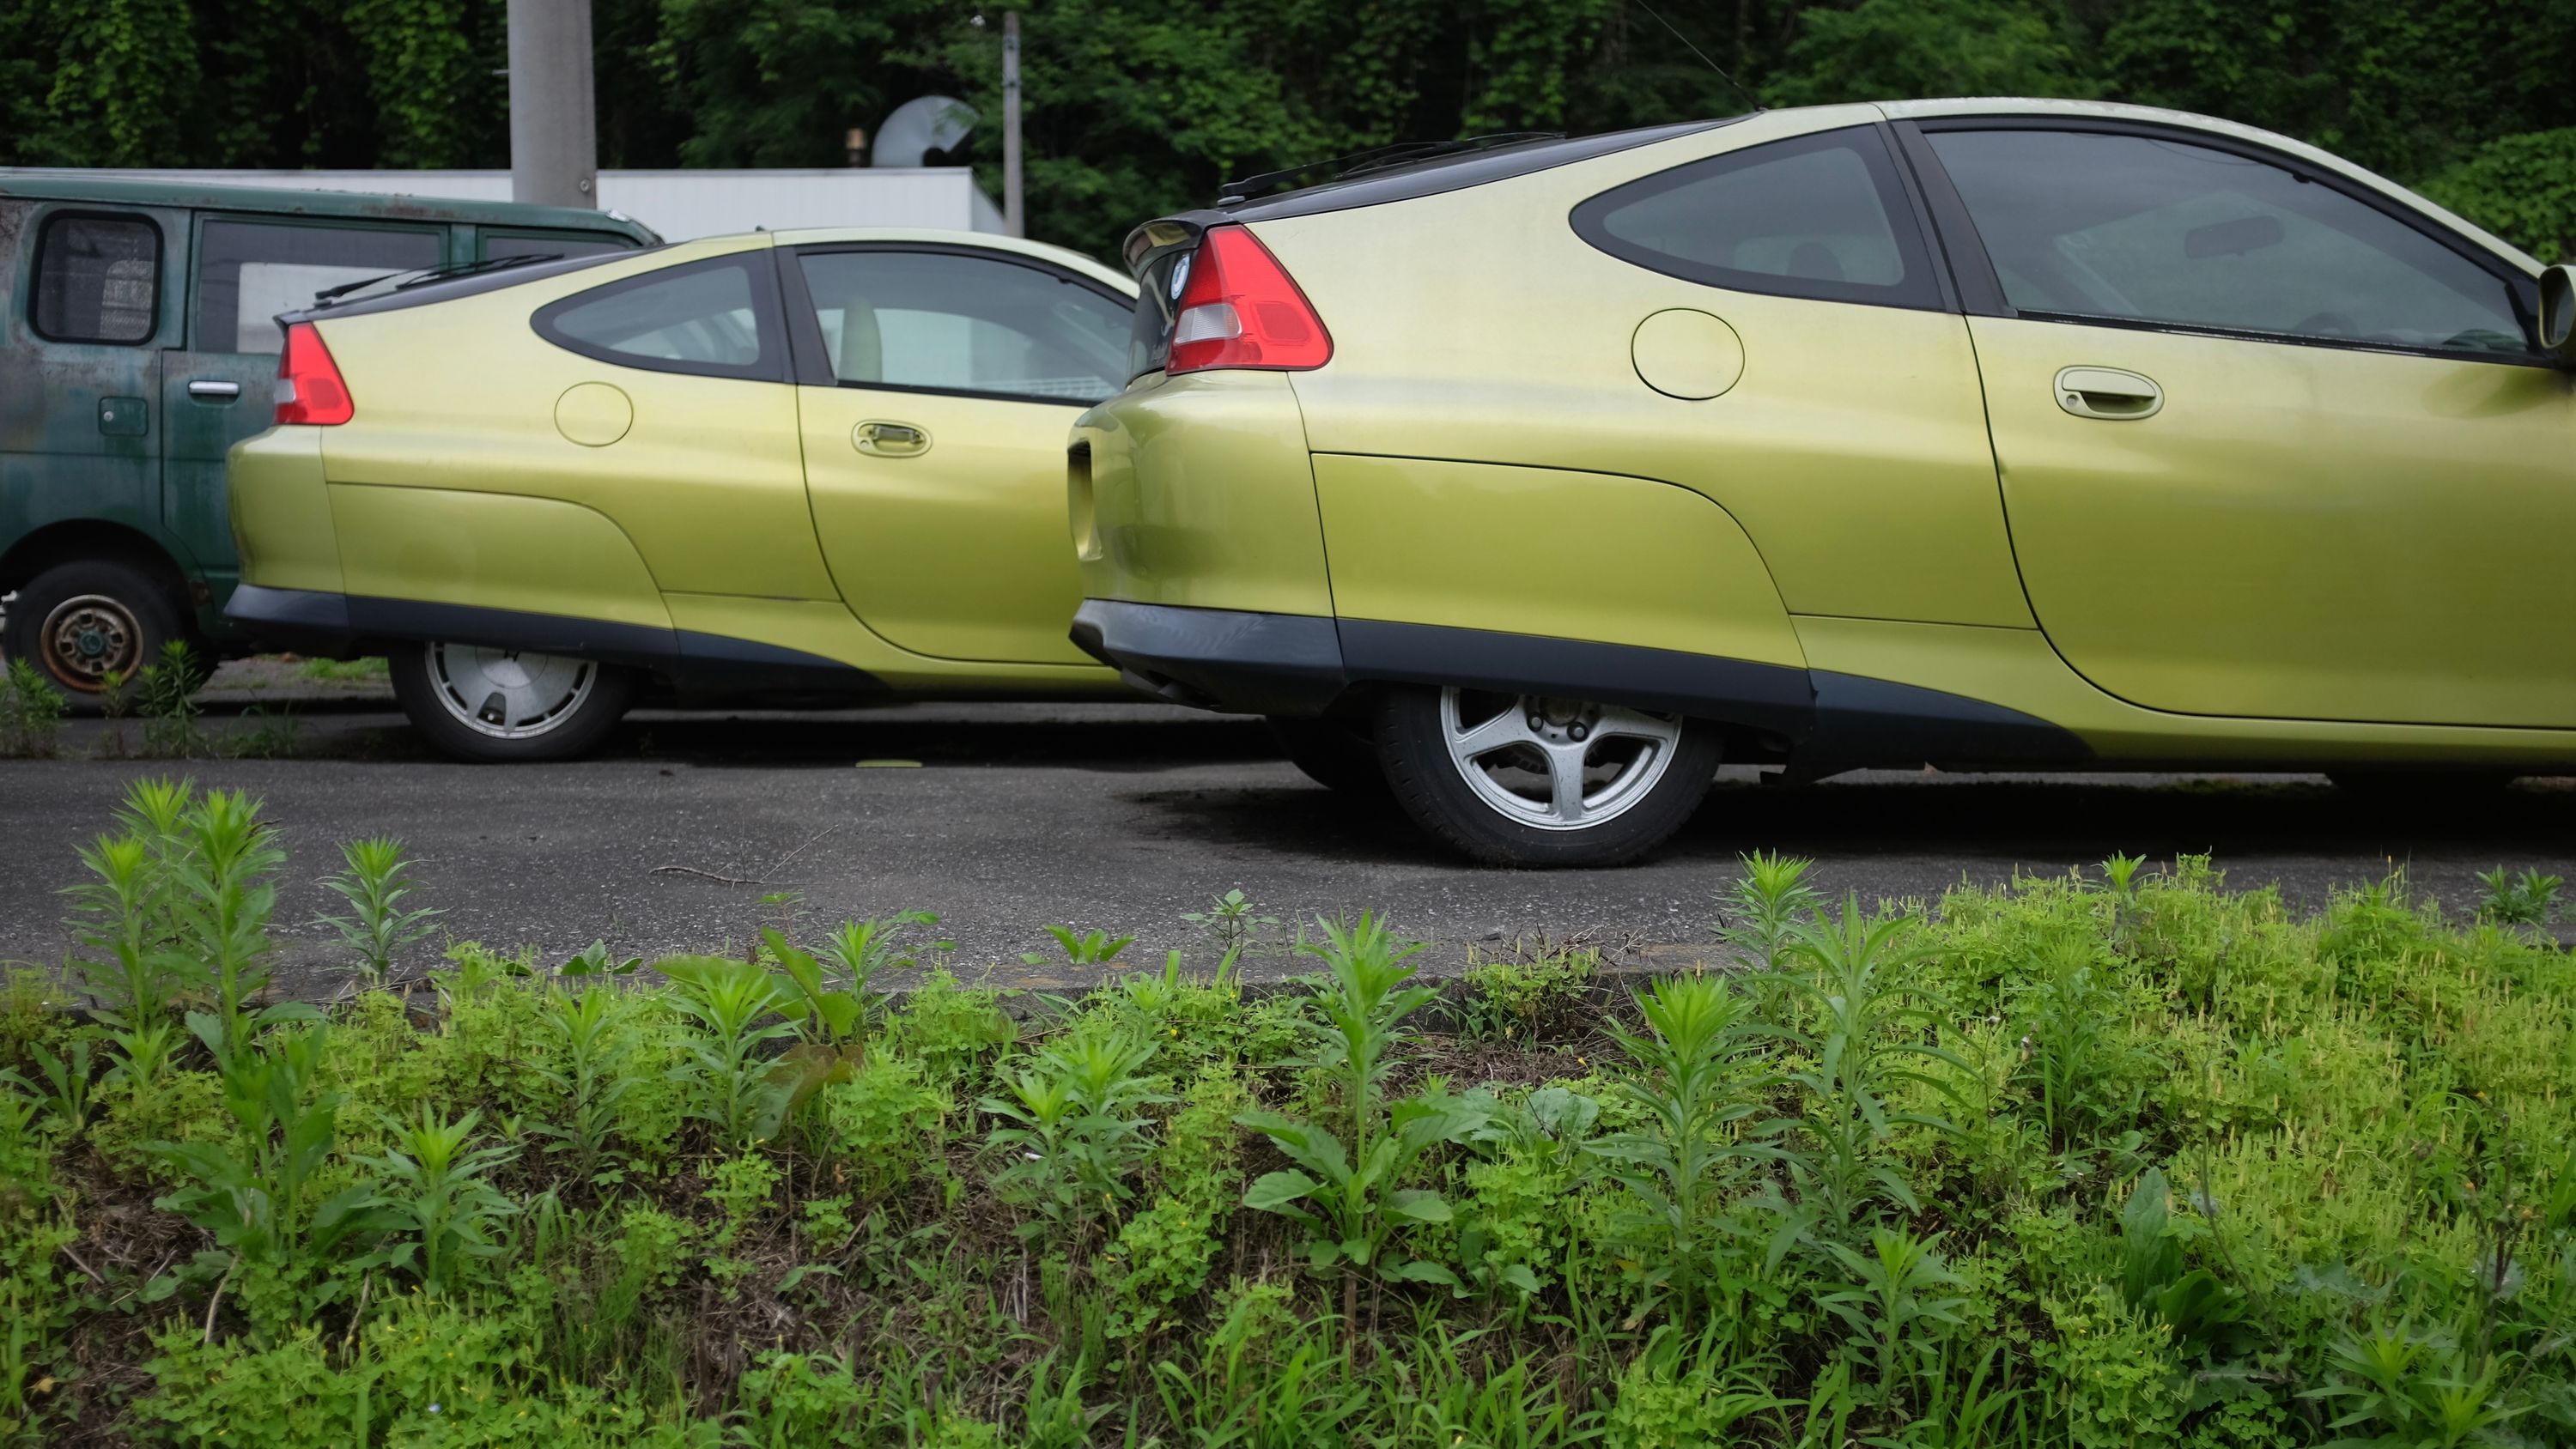 Two lime green first generation Honda Insight hybrid cars in a parking lot.